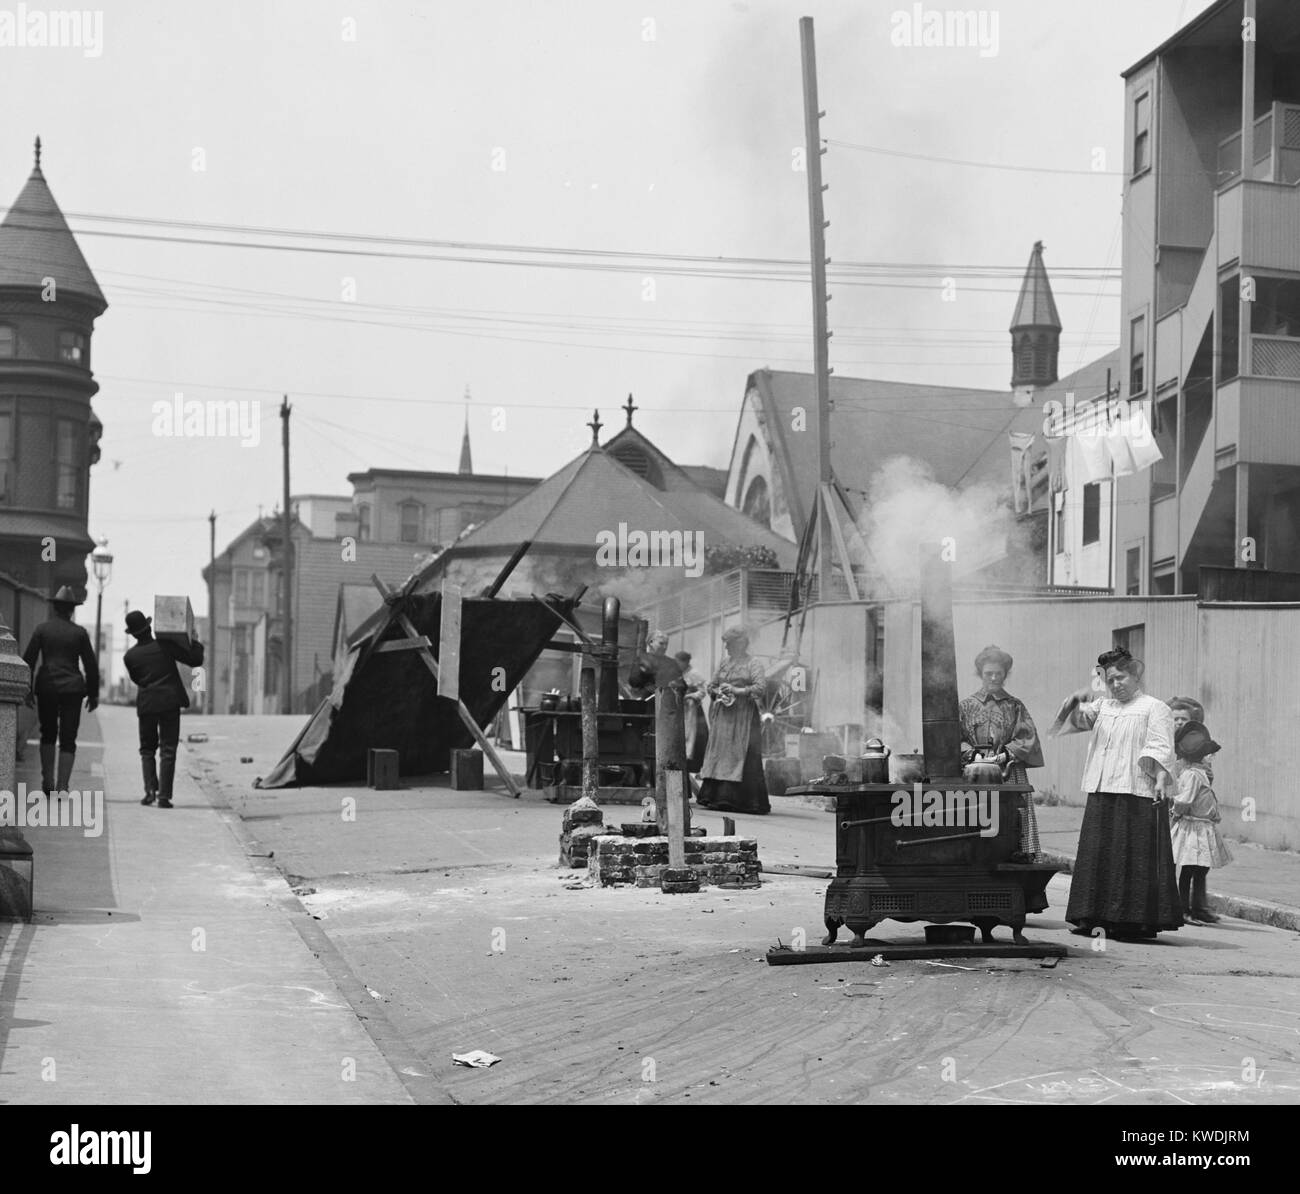 Women cooking in the street, after the April 18, 1906, San Francisco earthquake. Cooking in buildings was forbidden until houses were inspected for gas leaks that would case explosions and/or fires. (BSLOC 2017 17 46) Stock Photo